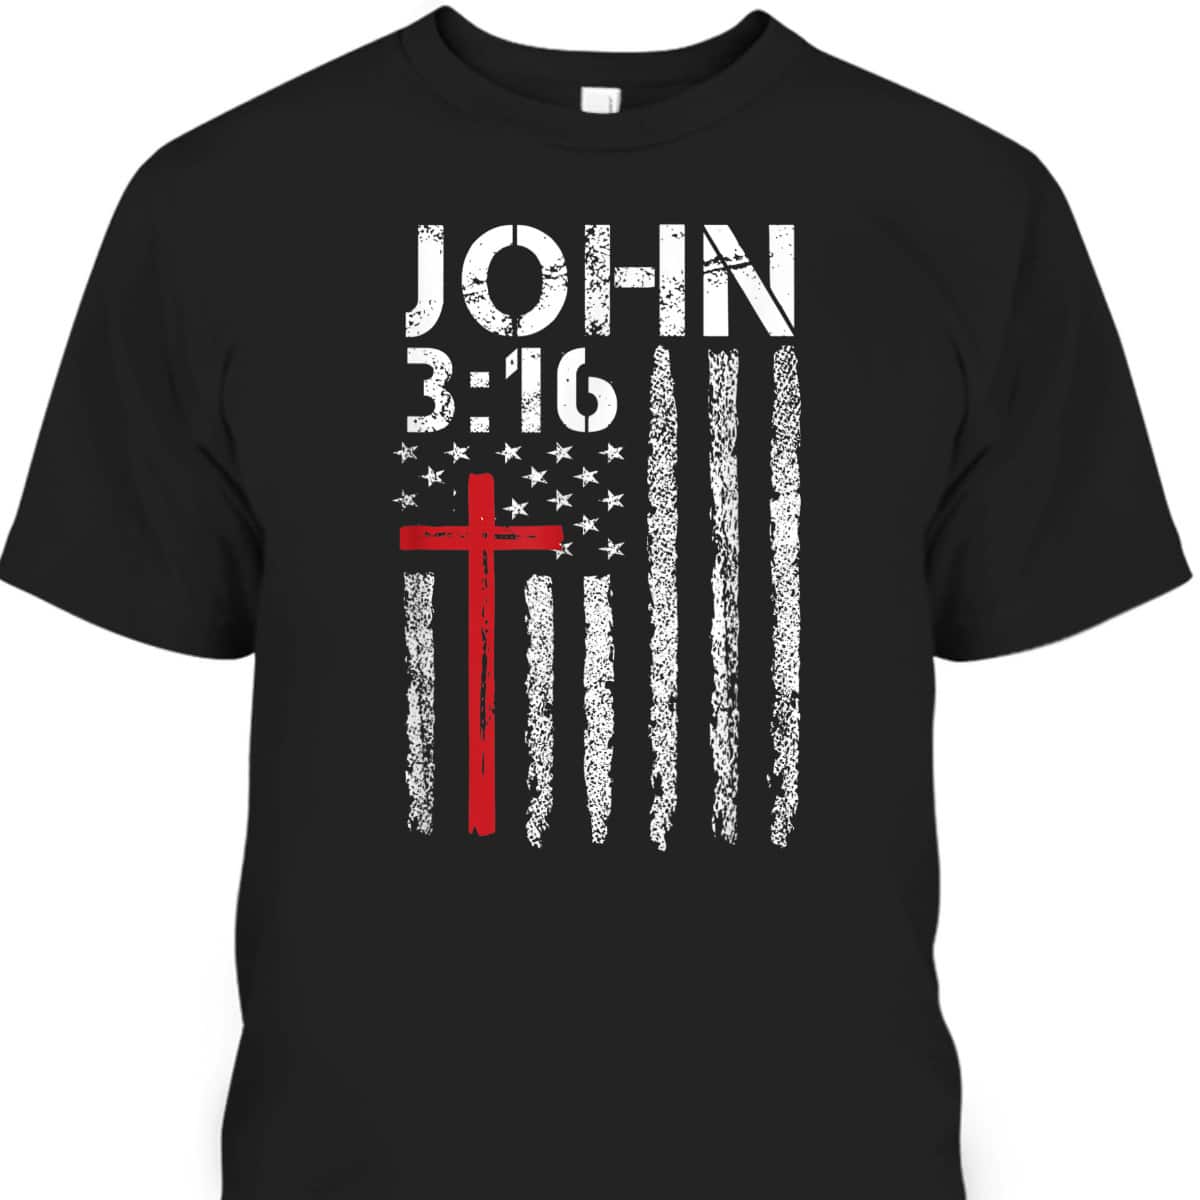 Faith Over Fears Cool Christian Cross American USA Flag Bible Verse 3:16 4th Of July T-Shirt